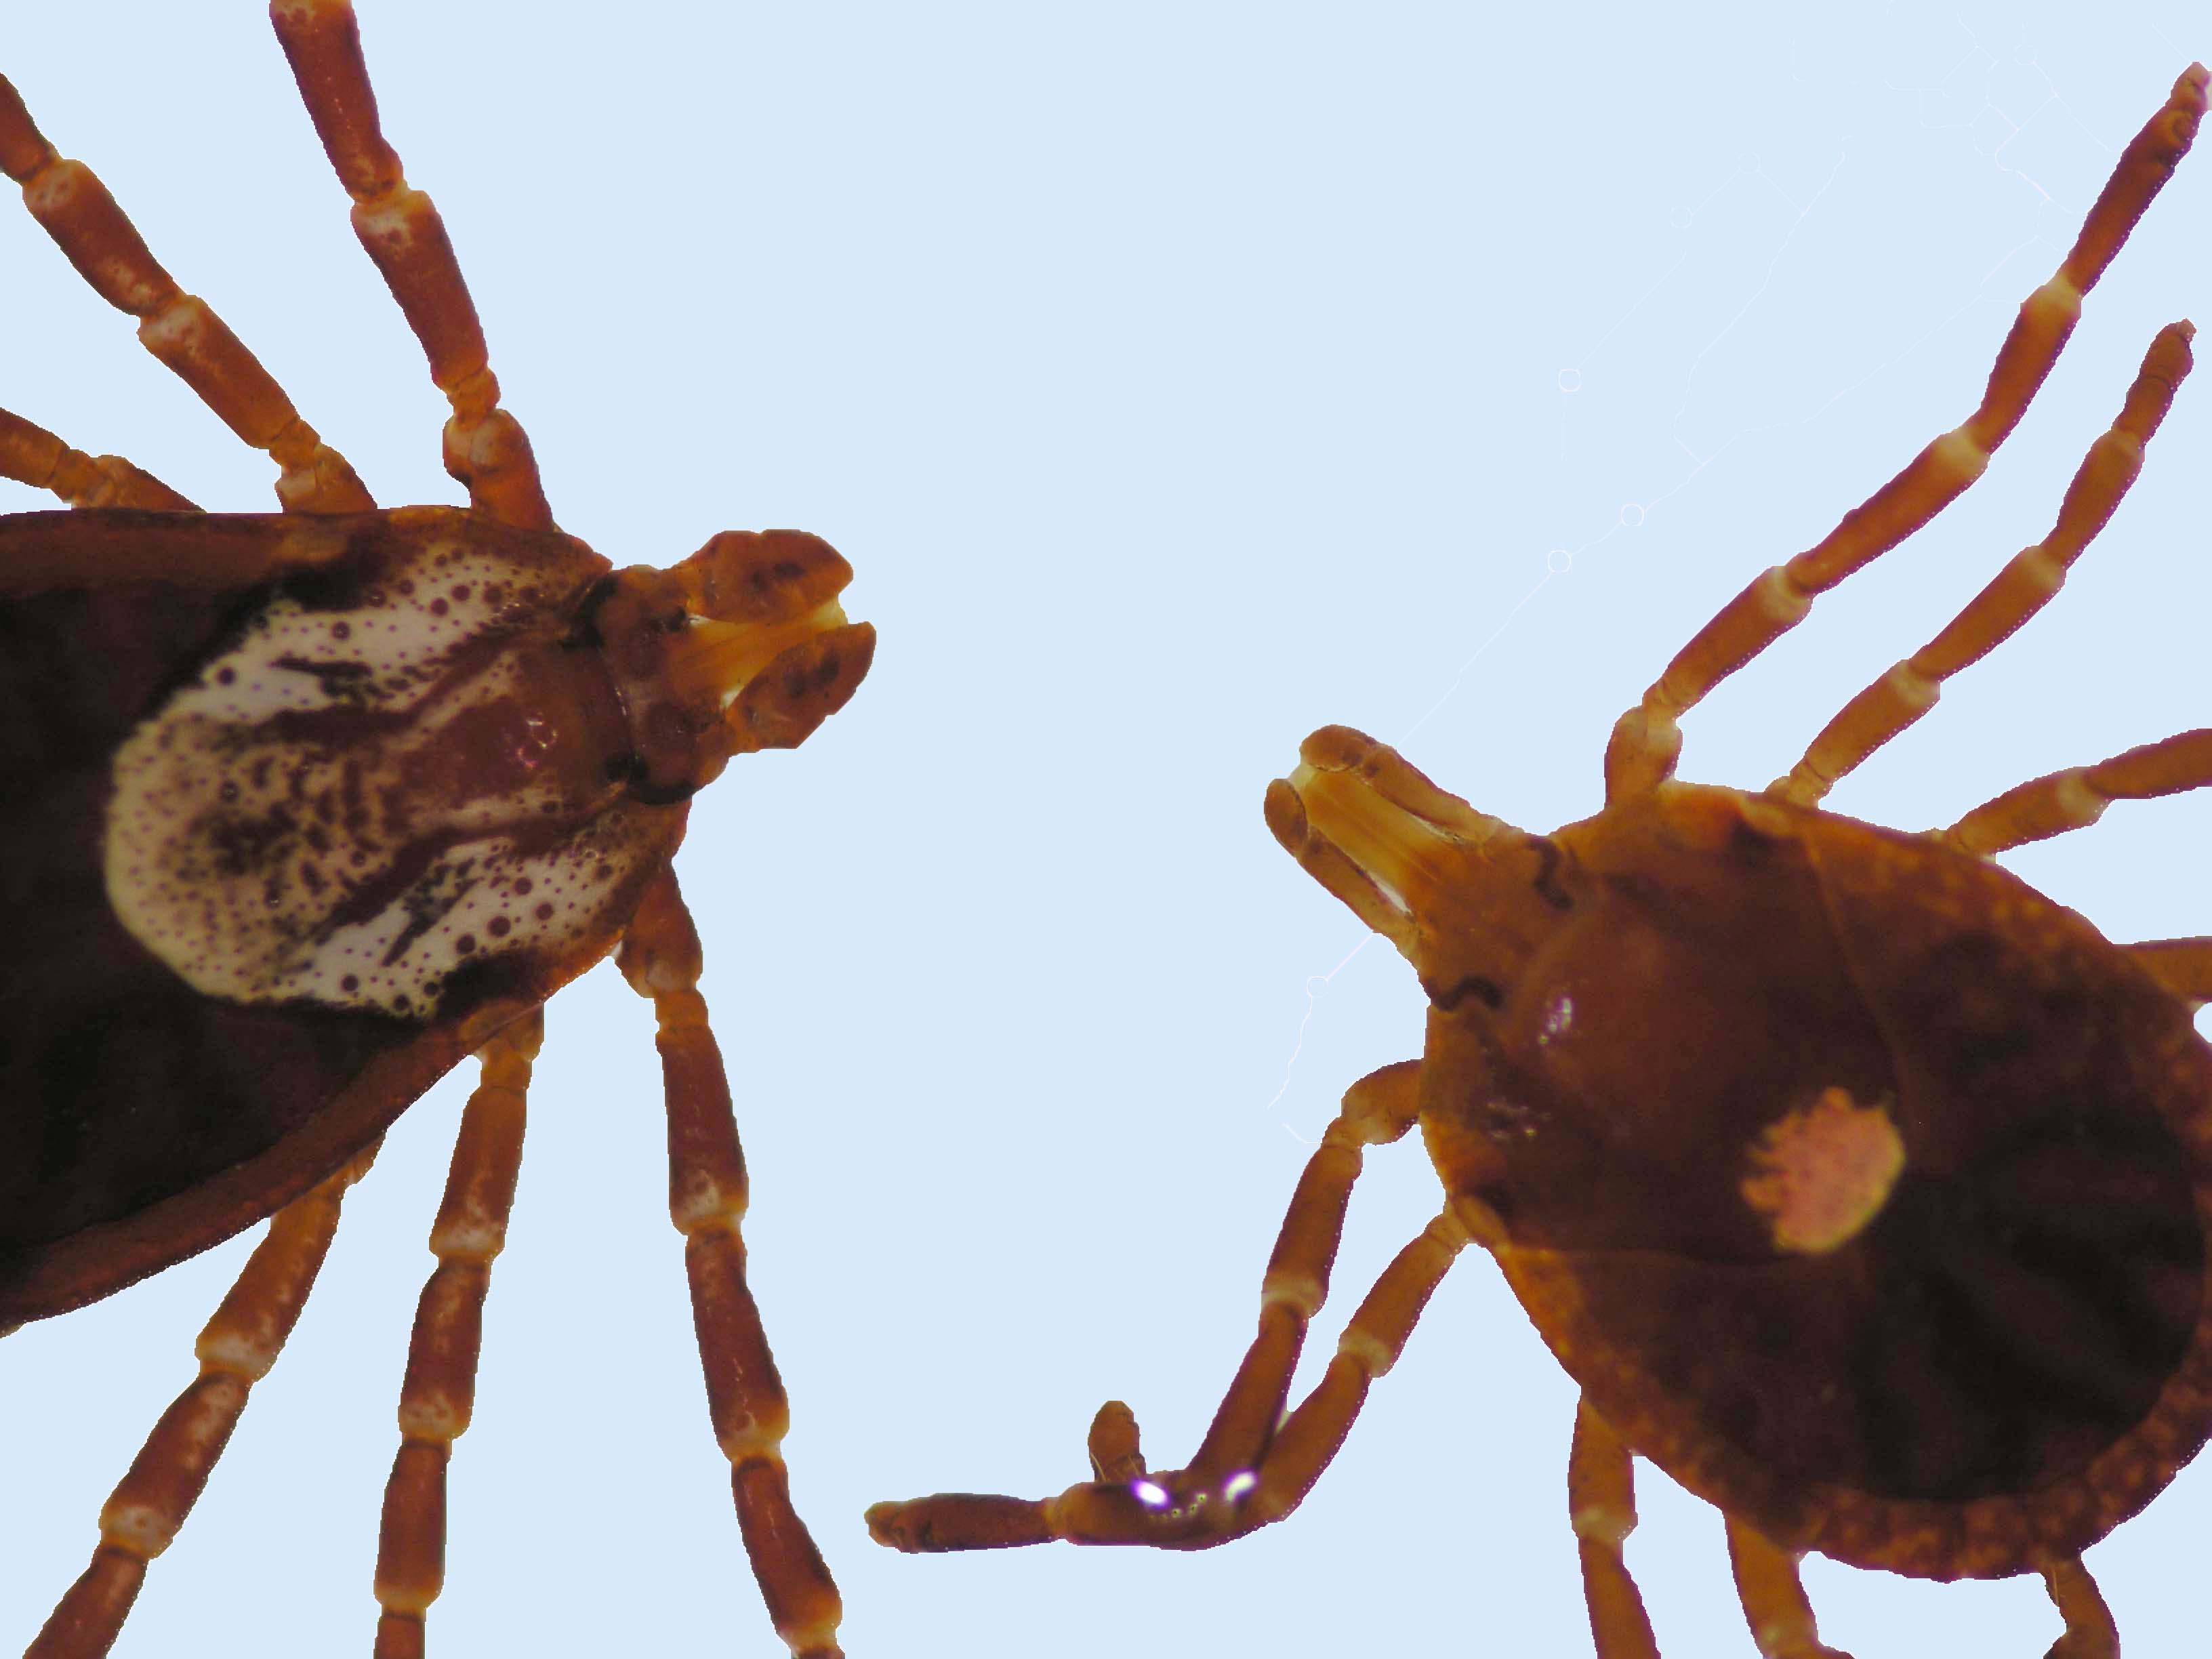 The picture shows the distinct differences between the American dog tick, left, and the lone star tick. Notice the American dog tick has short mouth parts and mottled markings while the lone star tick has long mouthparts and a white spot on its back.